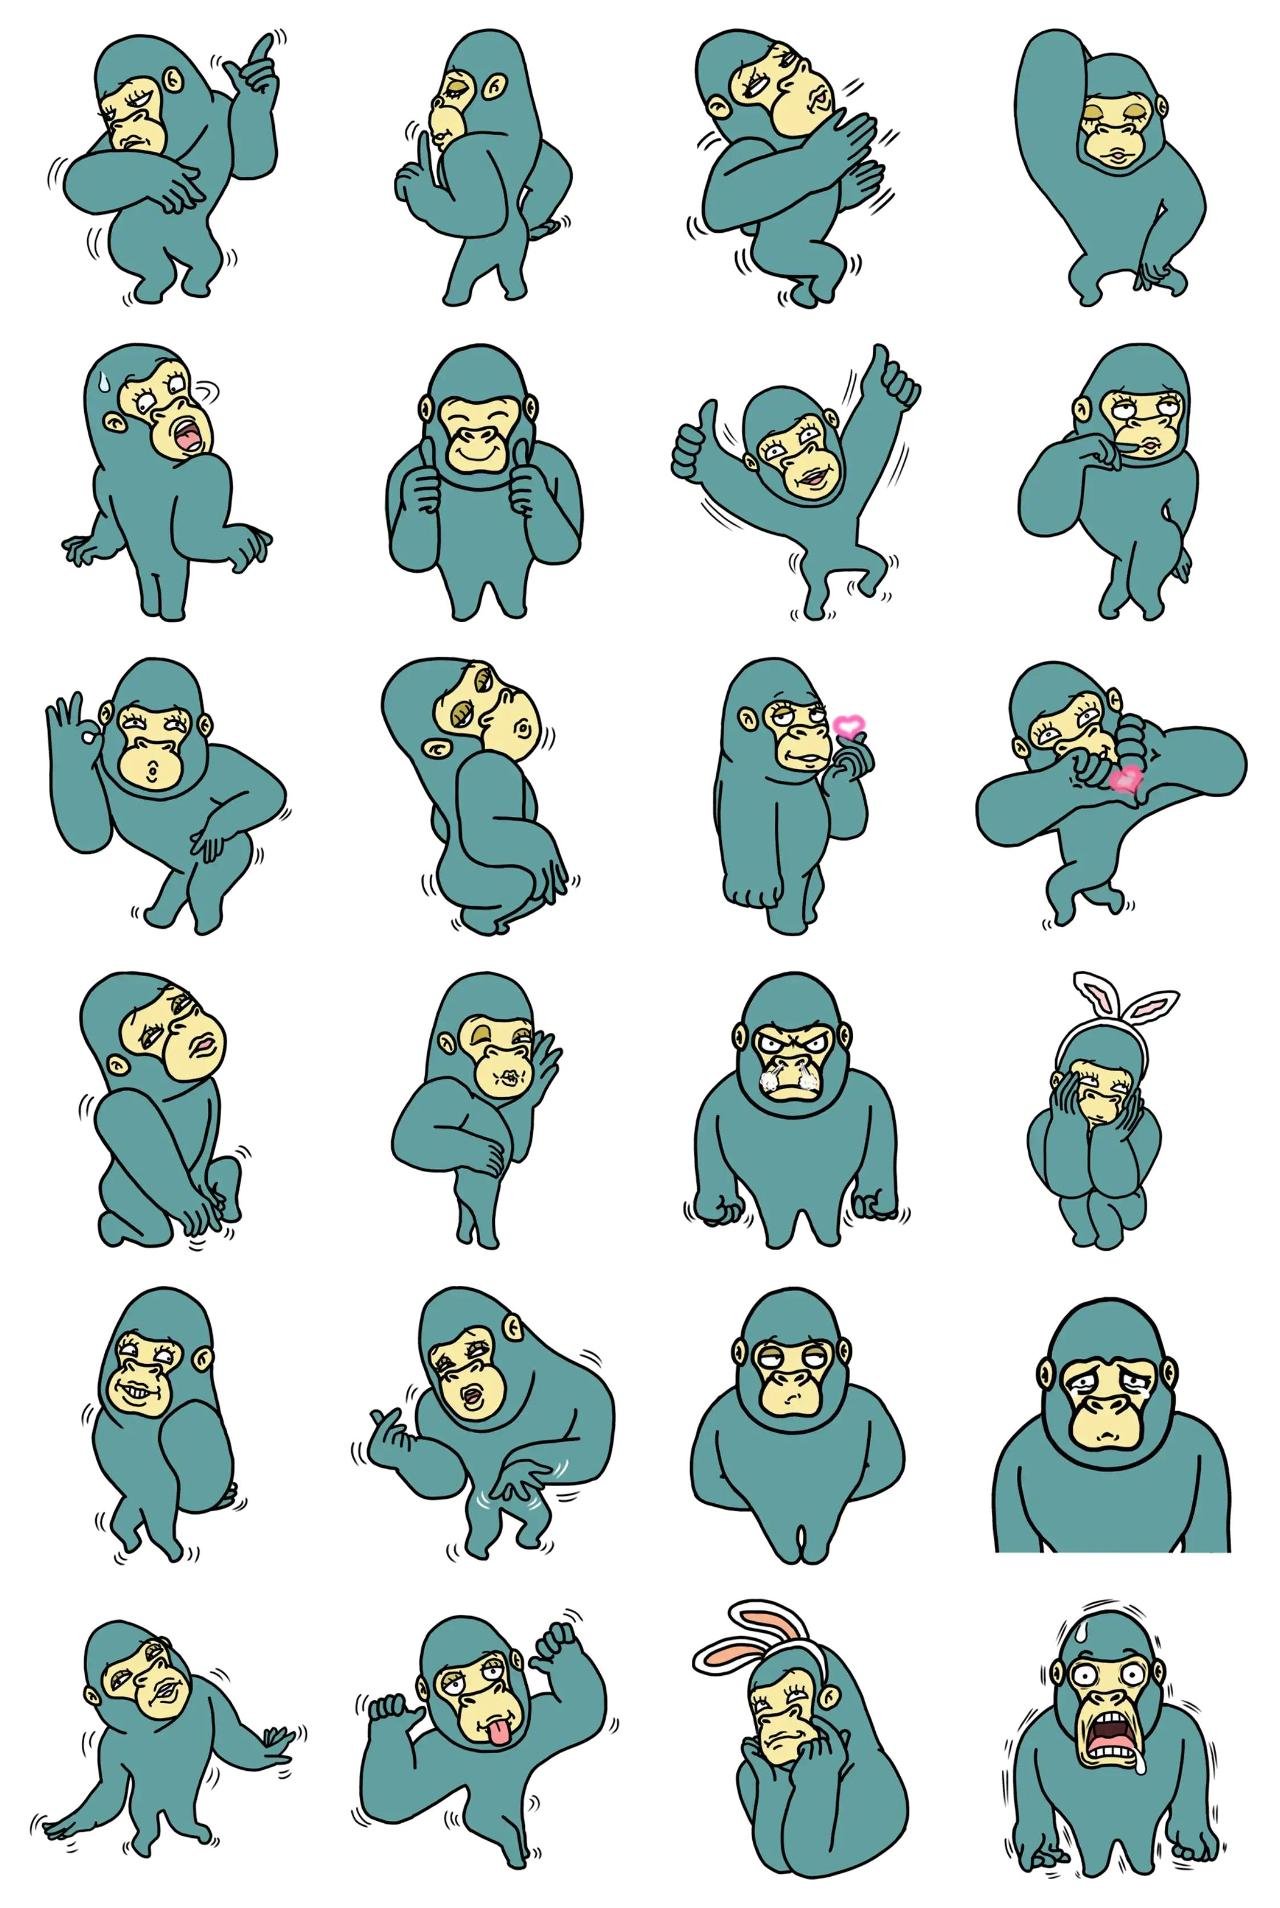 Idol Gorilla Moov Animals sticker pack for Whatsapp, Telegram, Signal, and others chatting and message apps